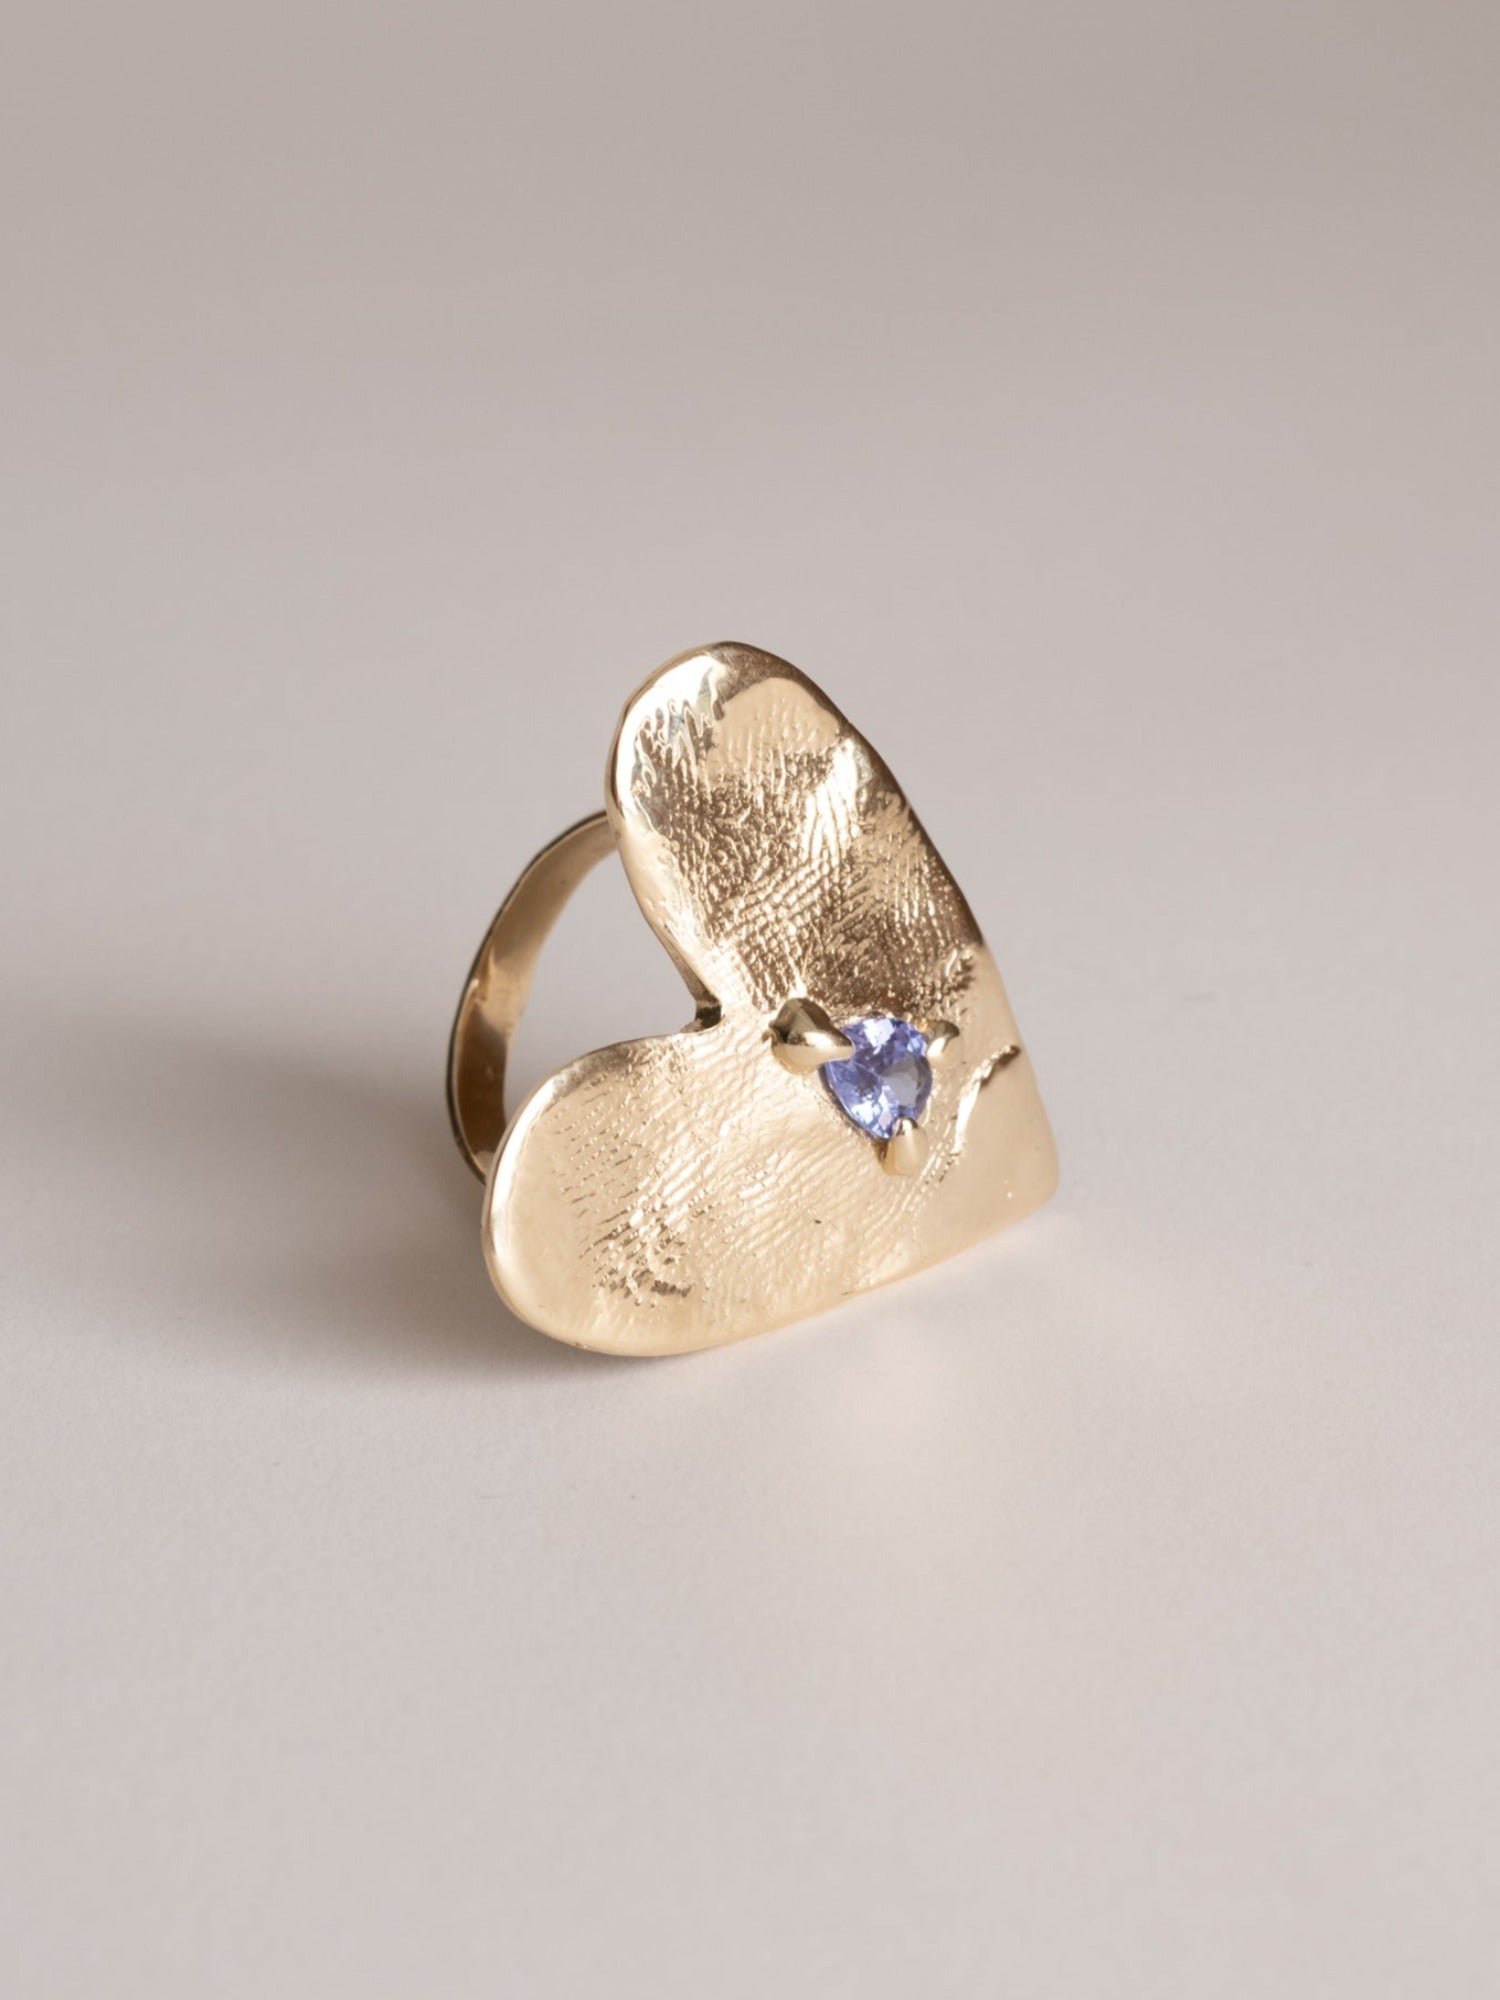 The Solid Gold Heart Ring (OOAK)